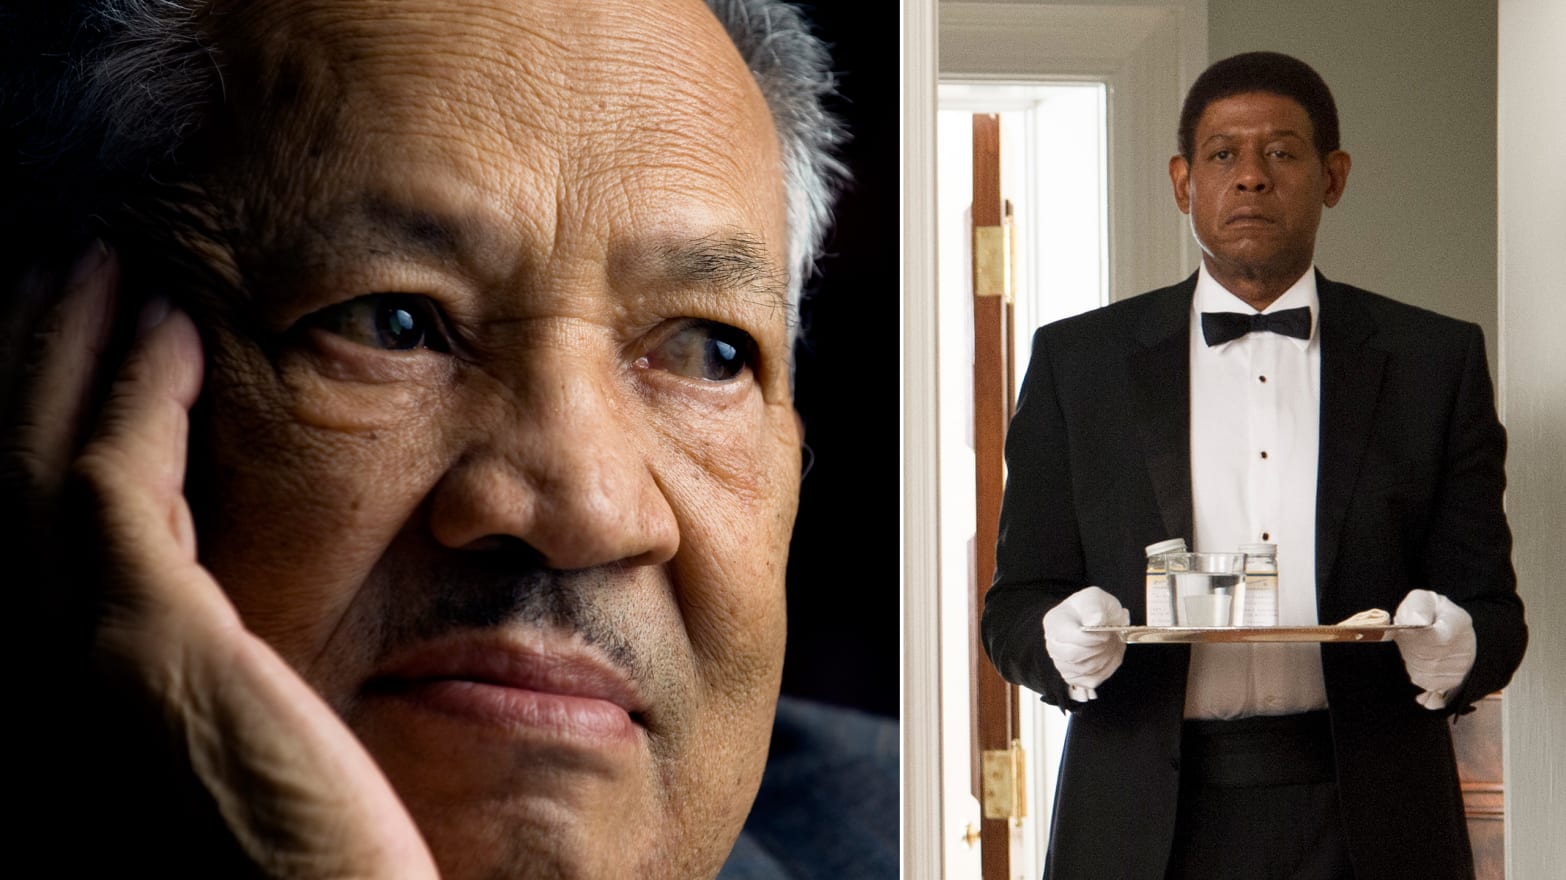 The Butler Fact Check How True Is This True Story?